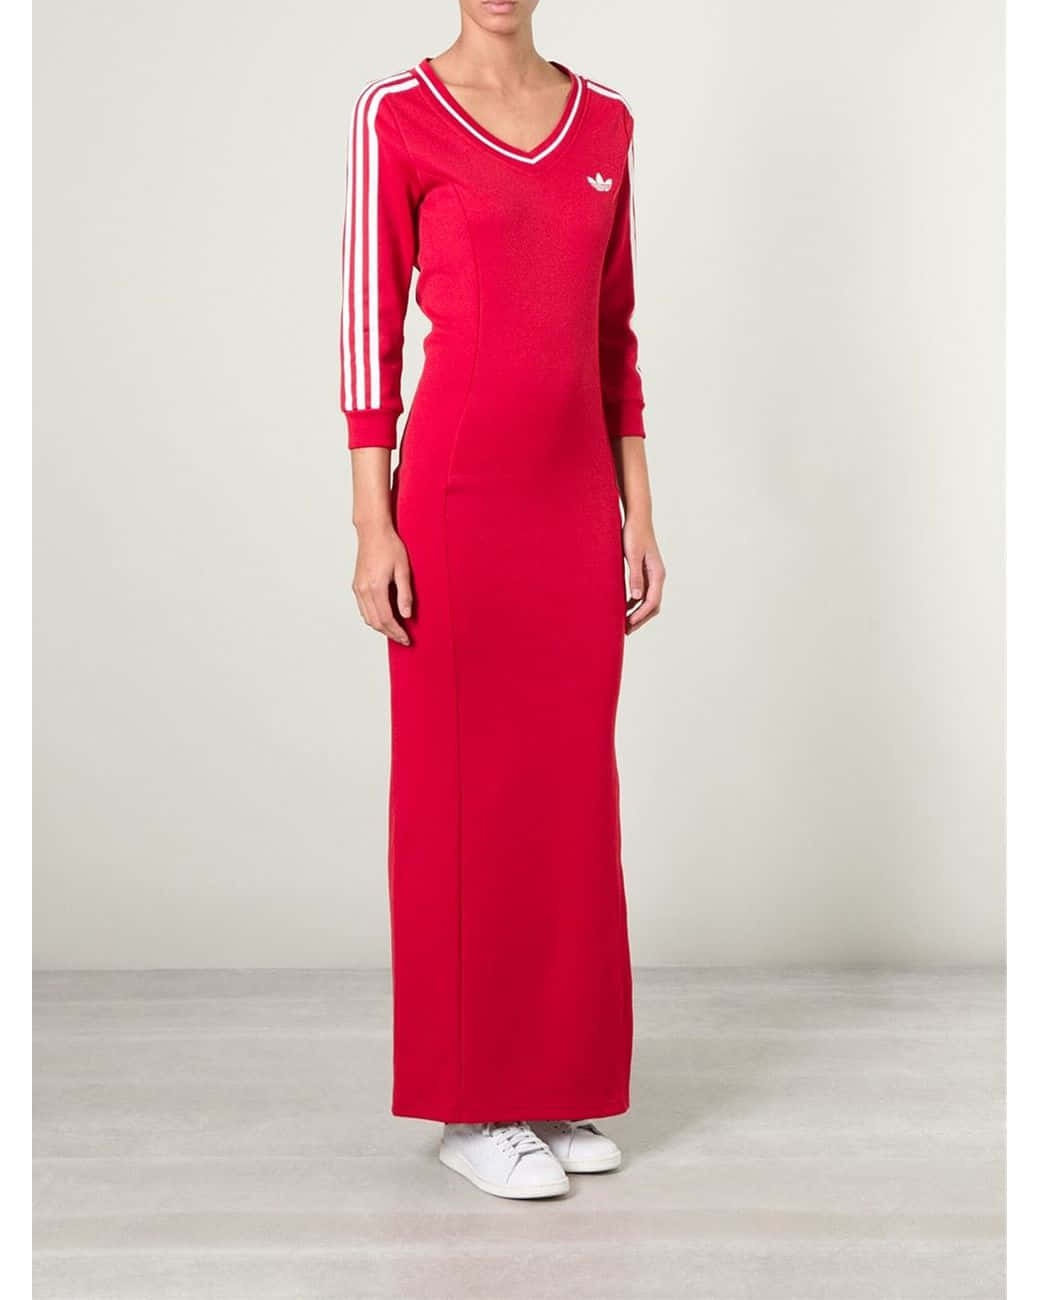 Woman In Adidas Long Sleeved Dress Picture